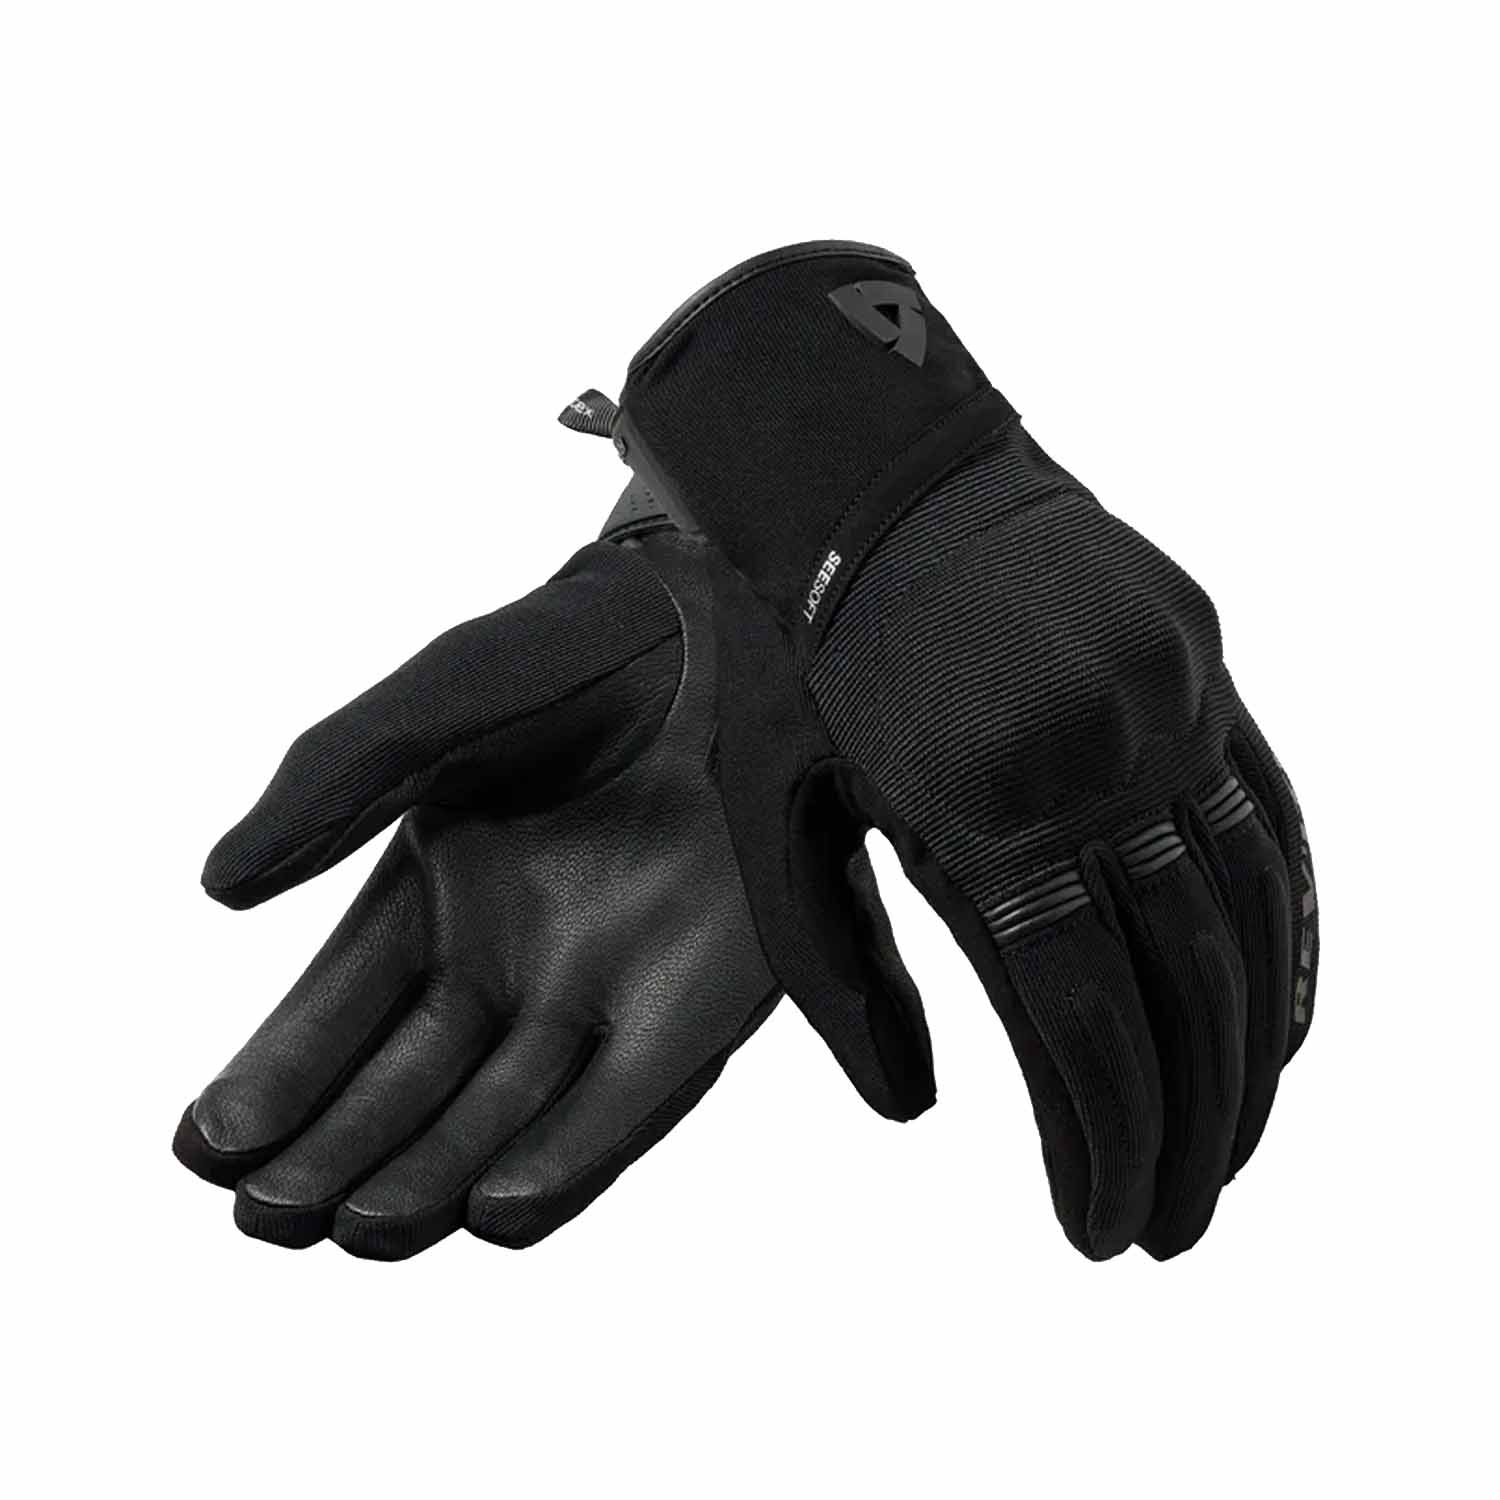 Image of EU REV'IT! Mosca 2 H2O Gloves Ladies Black Taille XS